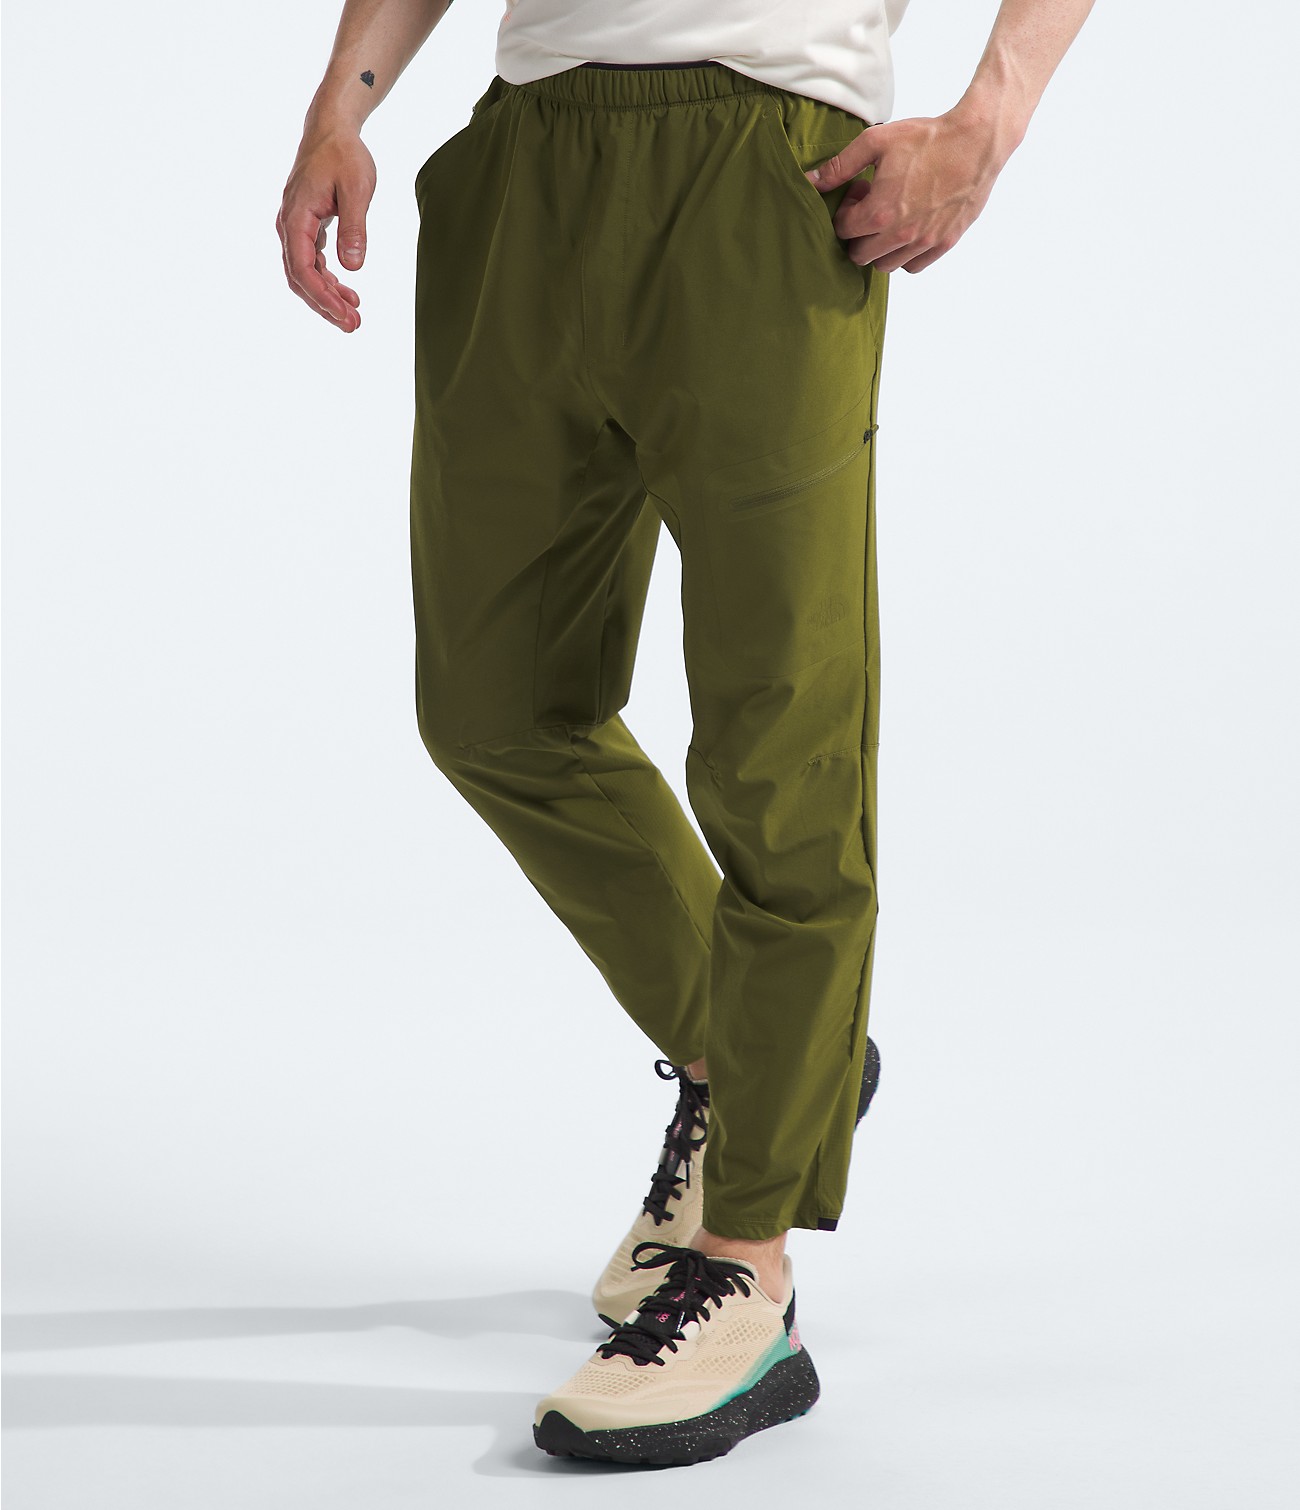 Men’s Lightstride Pants | The North Face